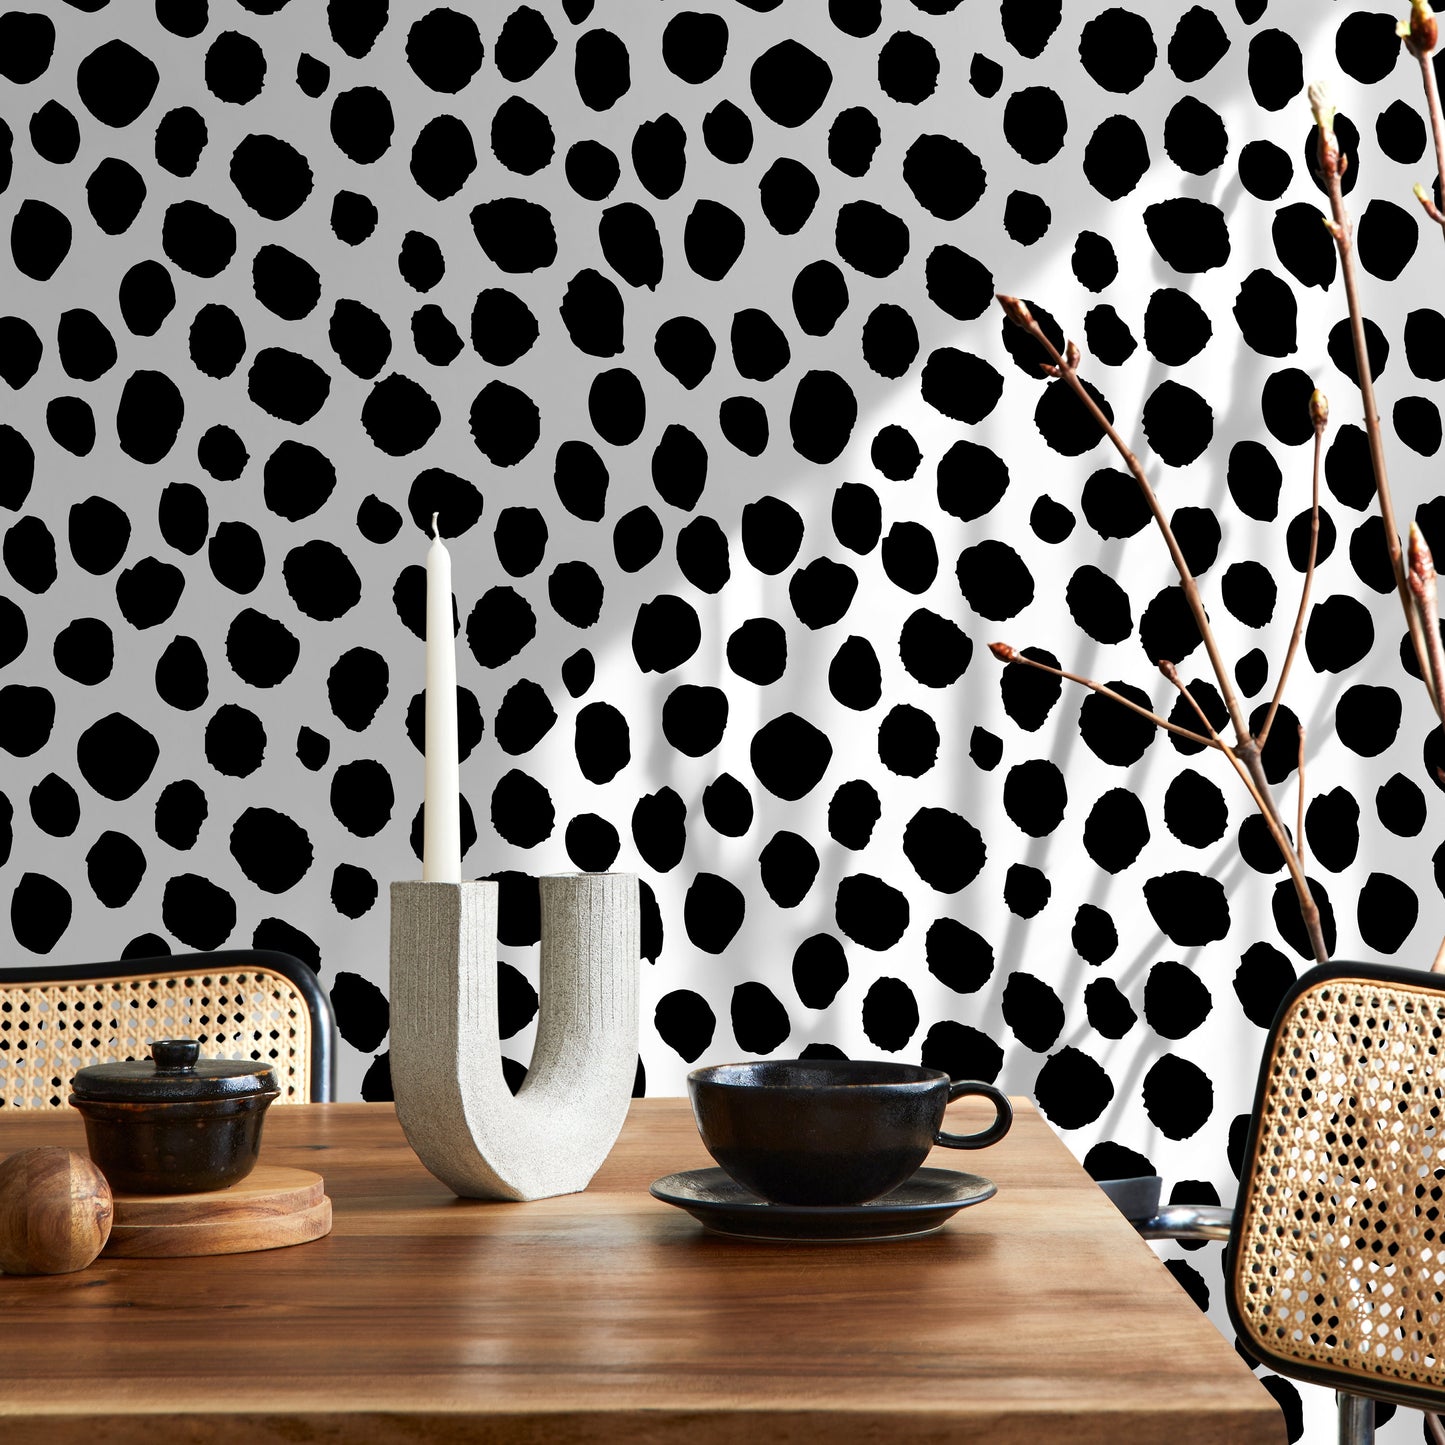 Removable Wallpaper, Temporary Wallpaper, Minimalistic Wallpaper, Peel and Stick Wallpaper, Wall Paper - A326